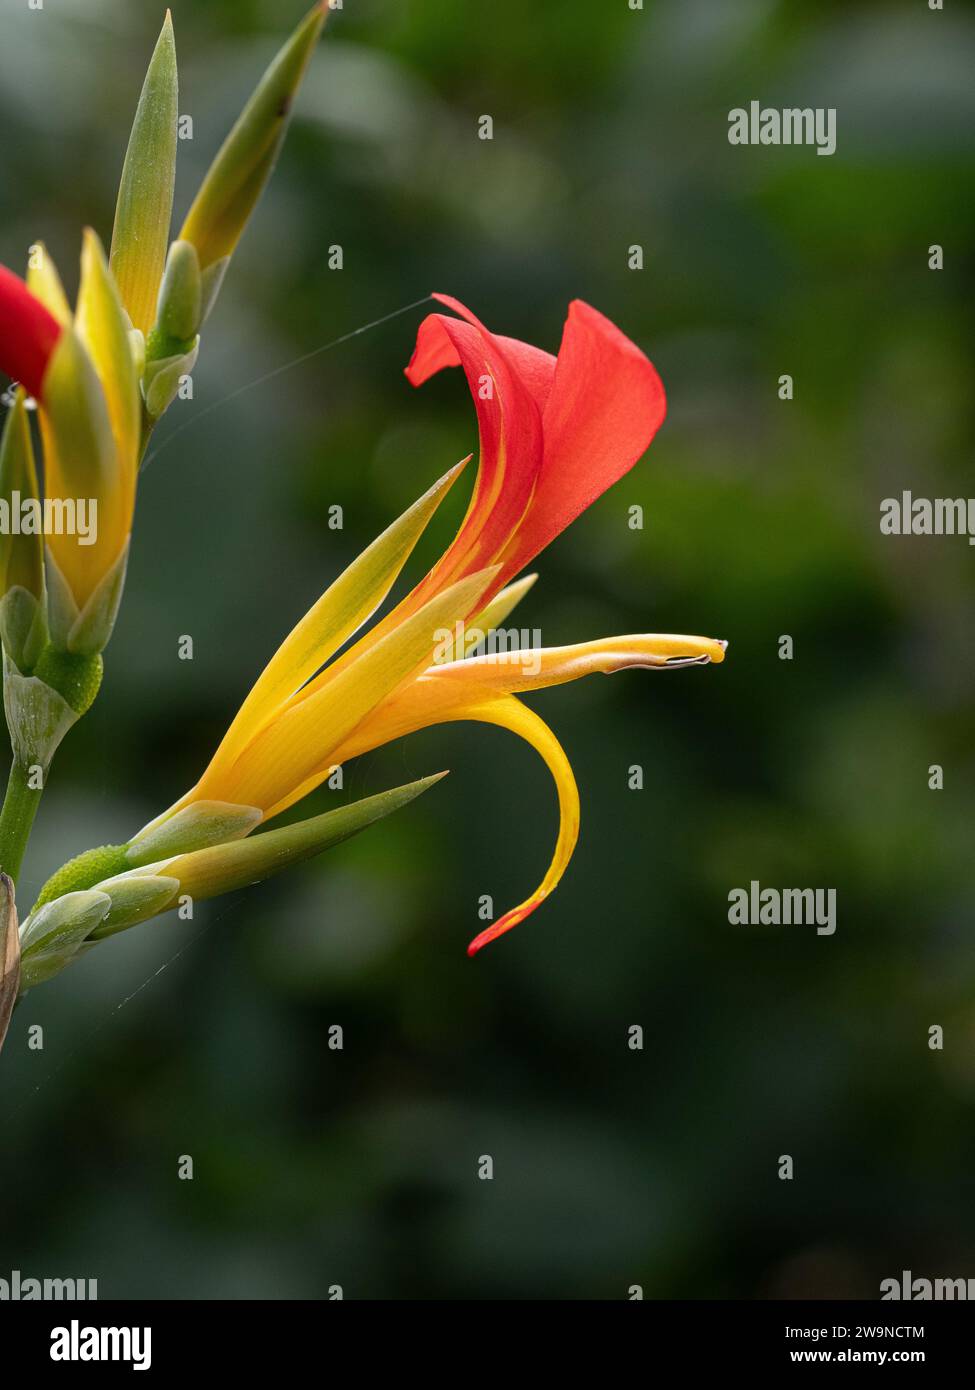 A close up of a single red and yellow flower of Canna patens Stock Photo